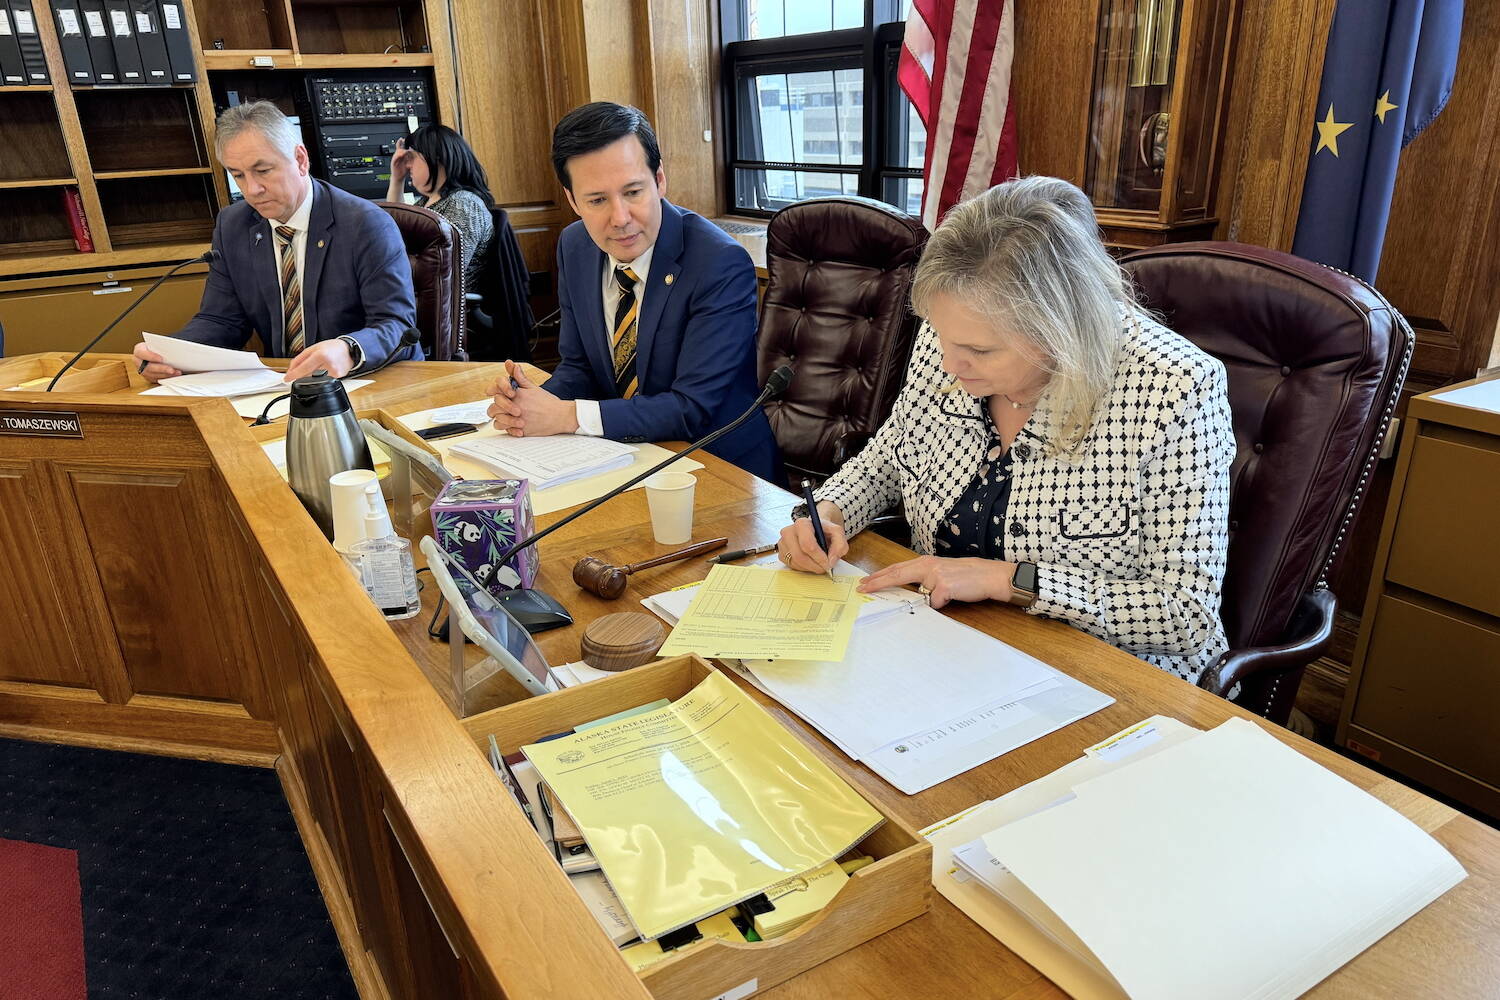 Rep. DeLena Johnson, R-Palmer and co-chair of the House Finance Committee, signs the committee’s version of the state operating budget on Friday. Looking on is Rep. Neal Foster, D-Nome, and at background is Rep. Frank Tomaszewski, R-Fairbanks. (James Brooks/Alaska Beacon)